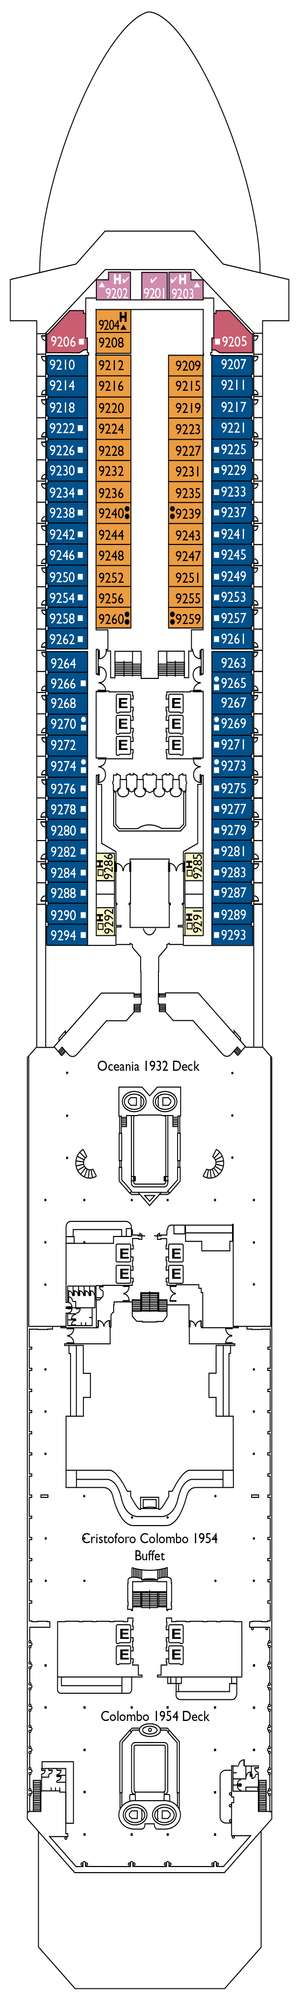 Deck plan for Costa Fortuna